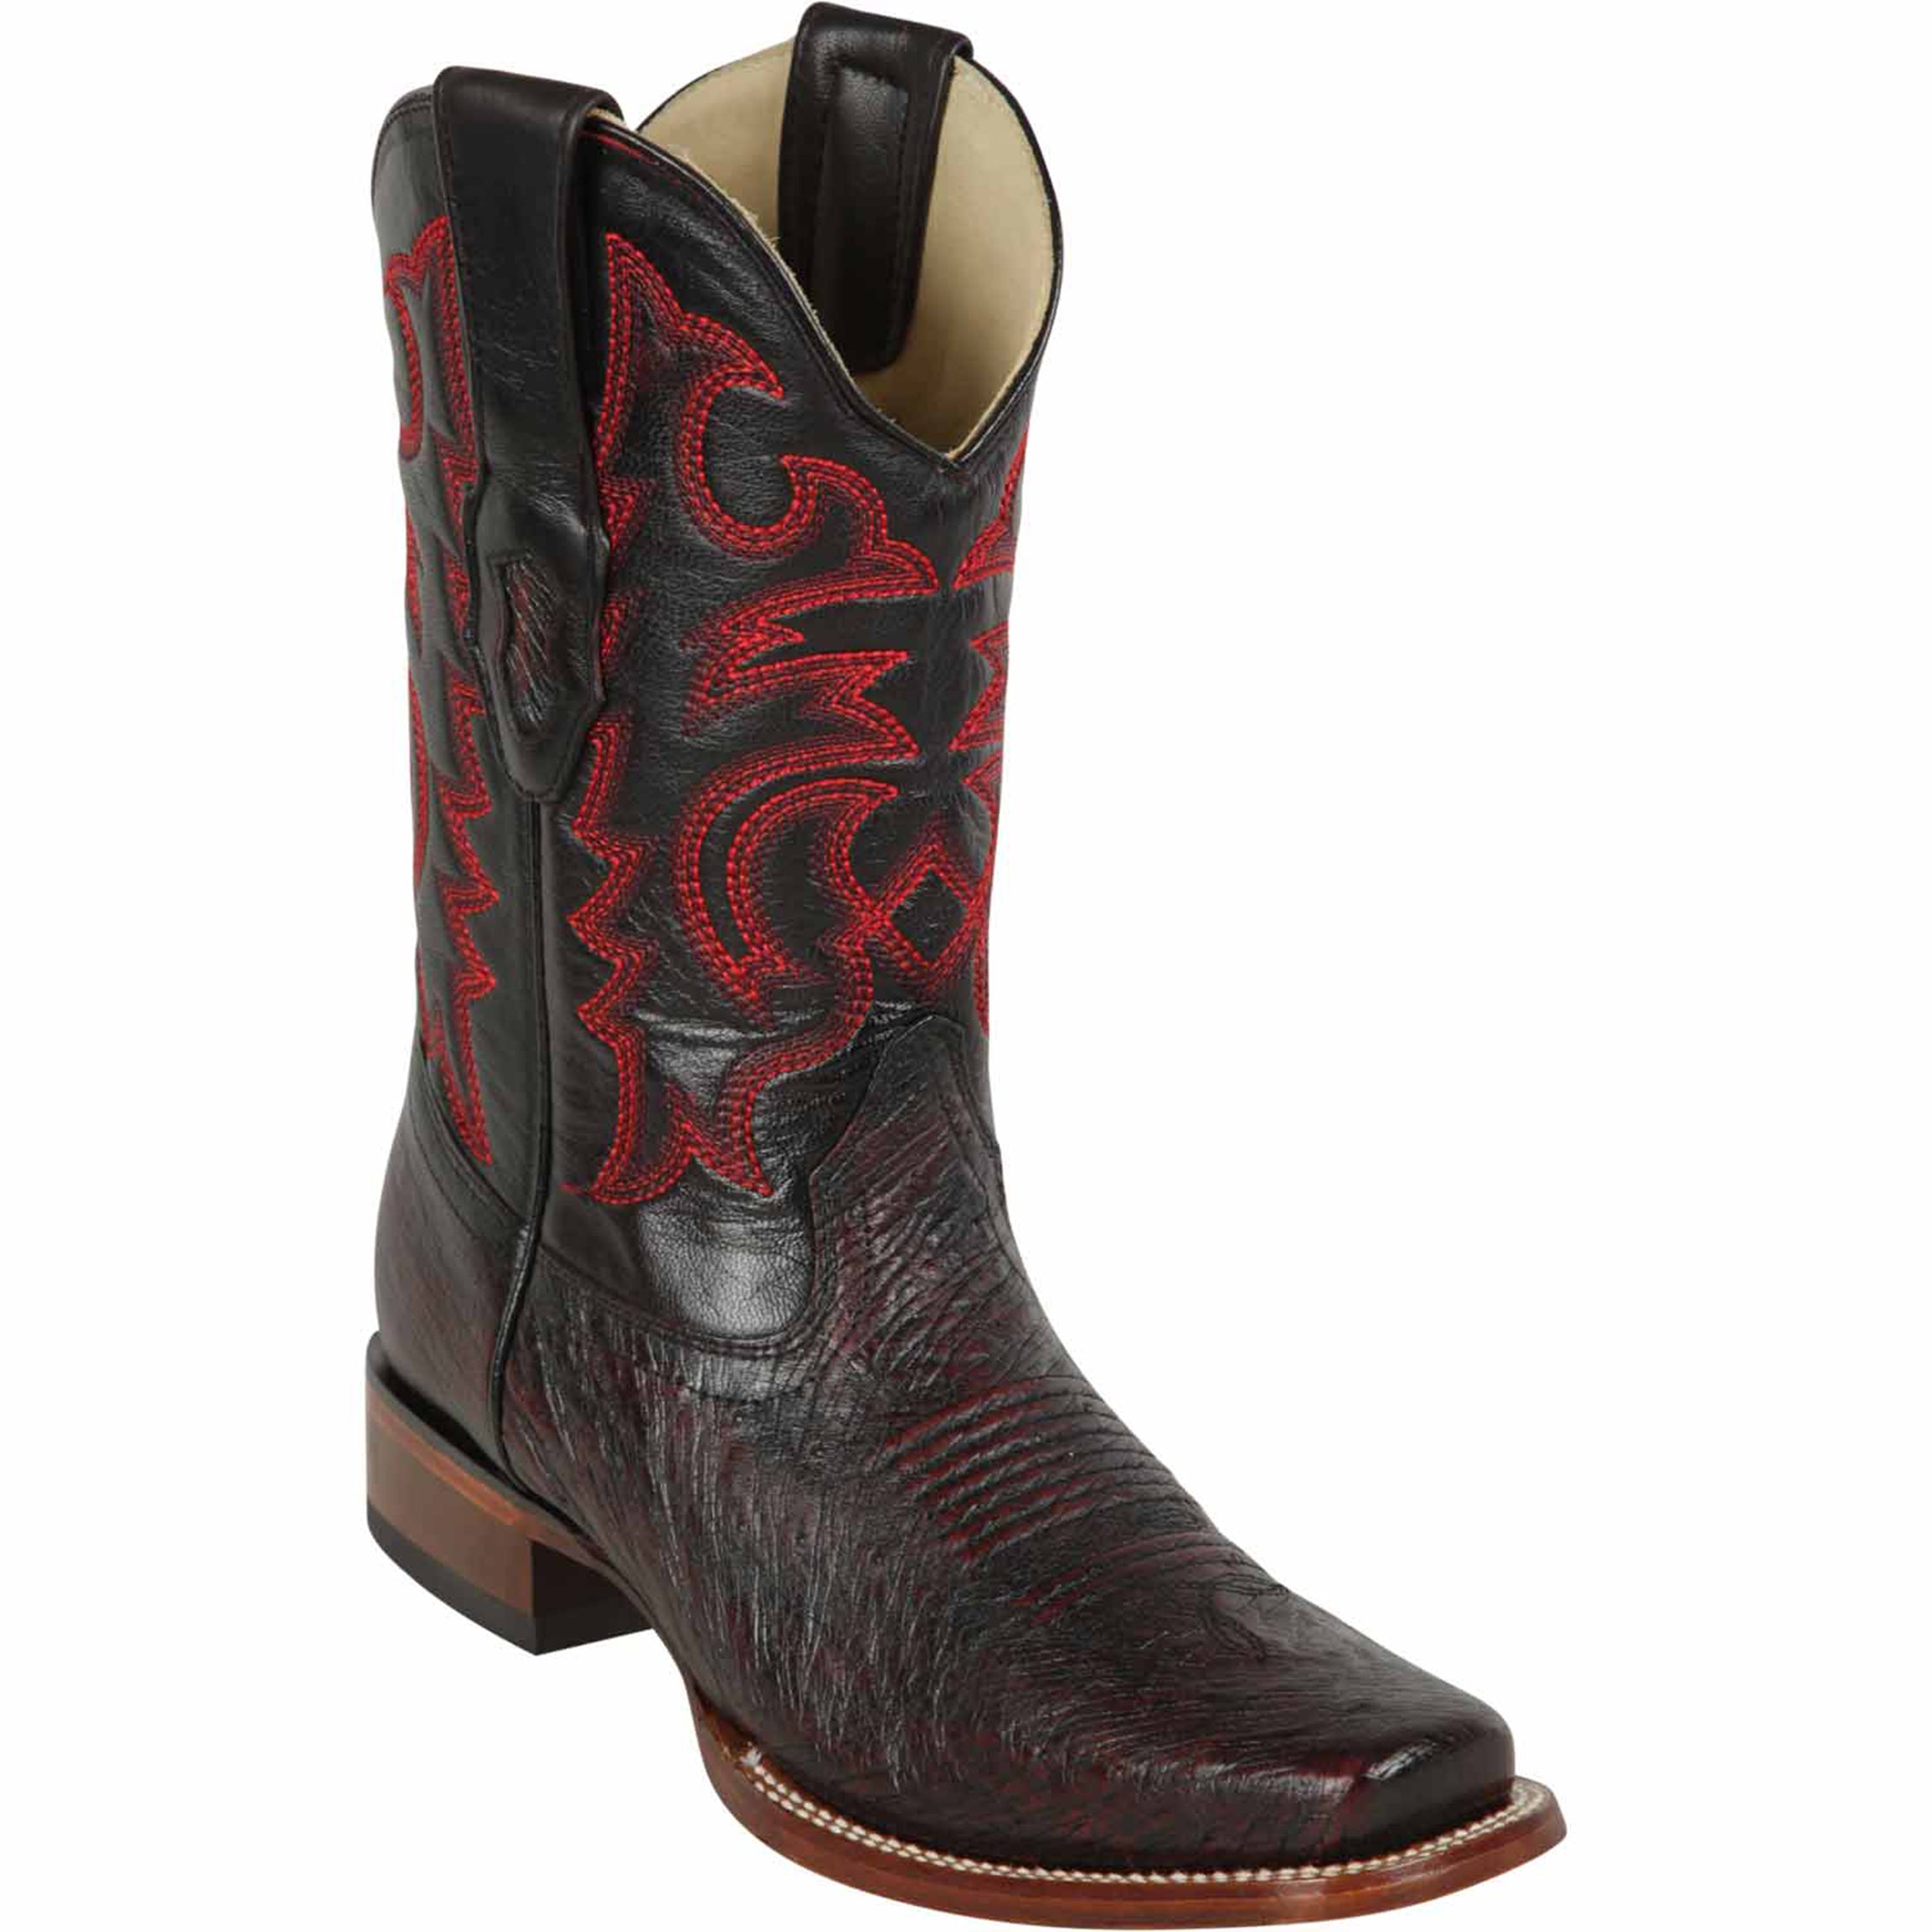 Mens Square Toe Smooth Ostrich Boots Black Cherry - Los Altos Boots